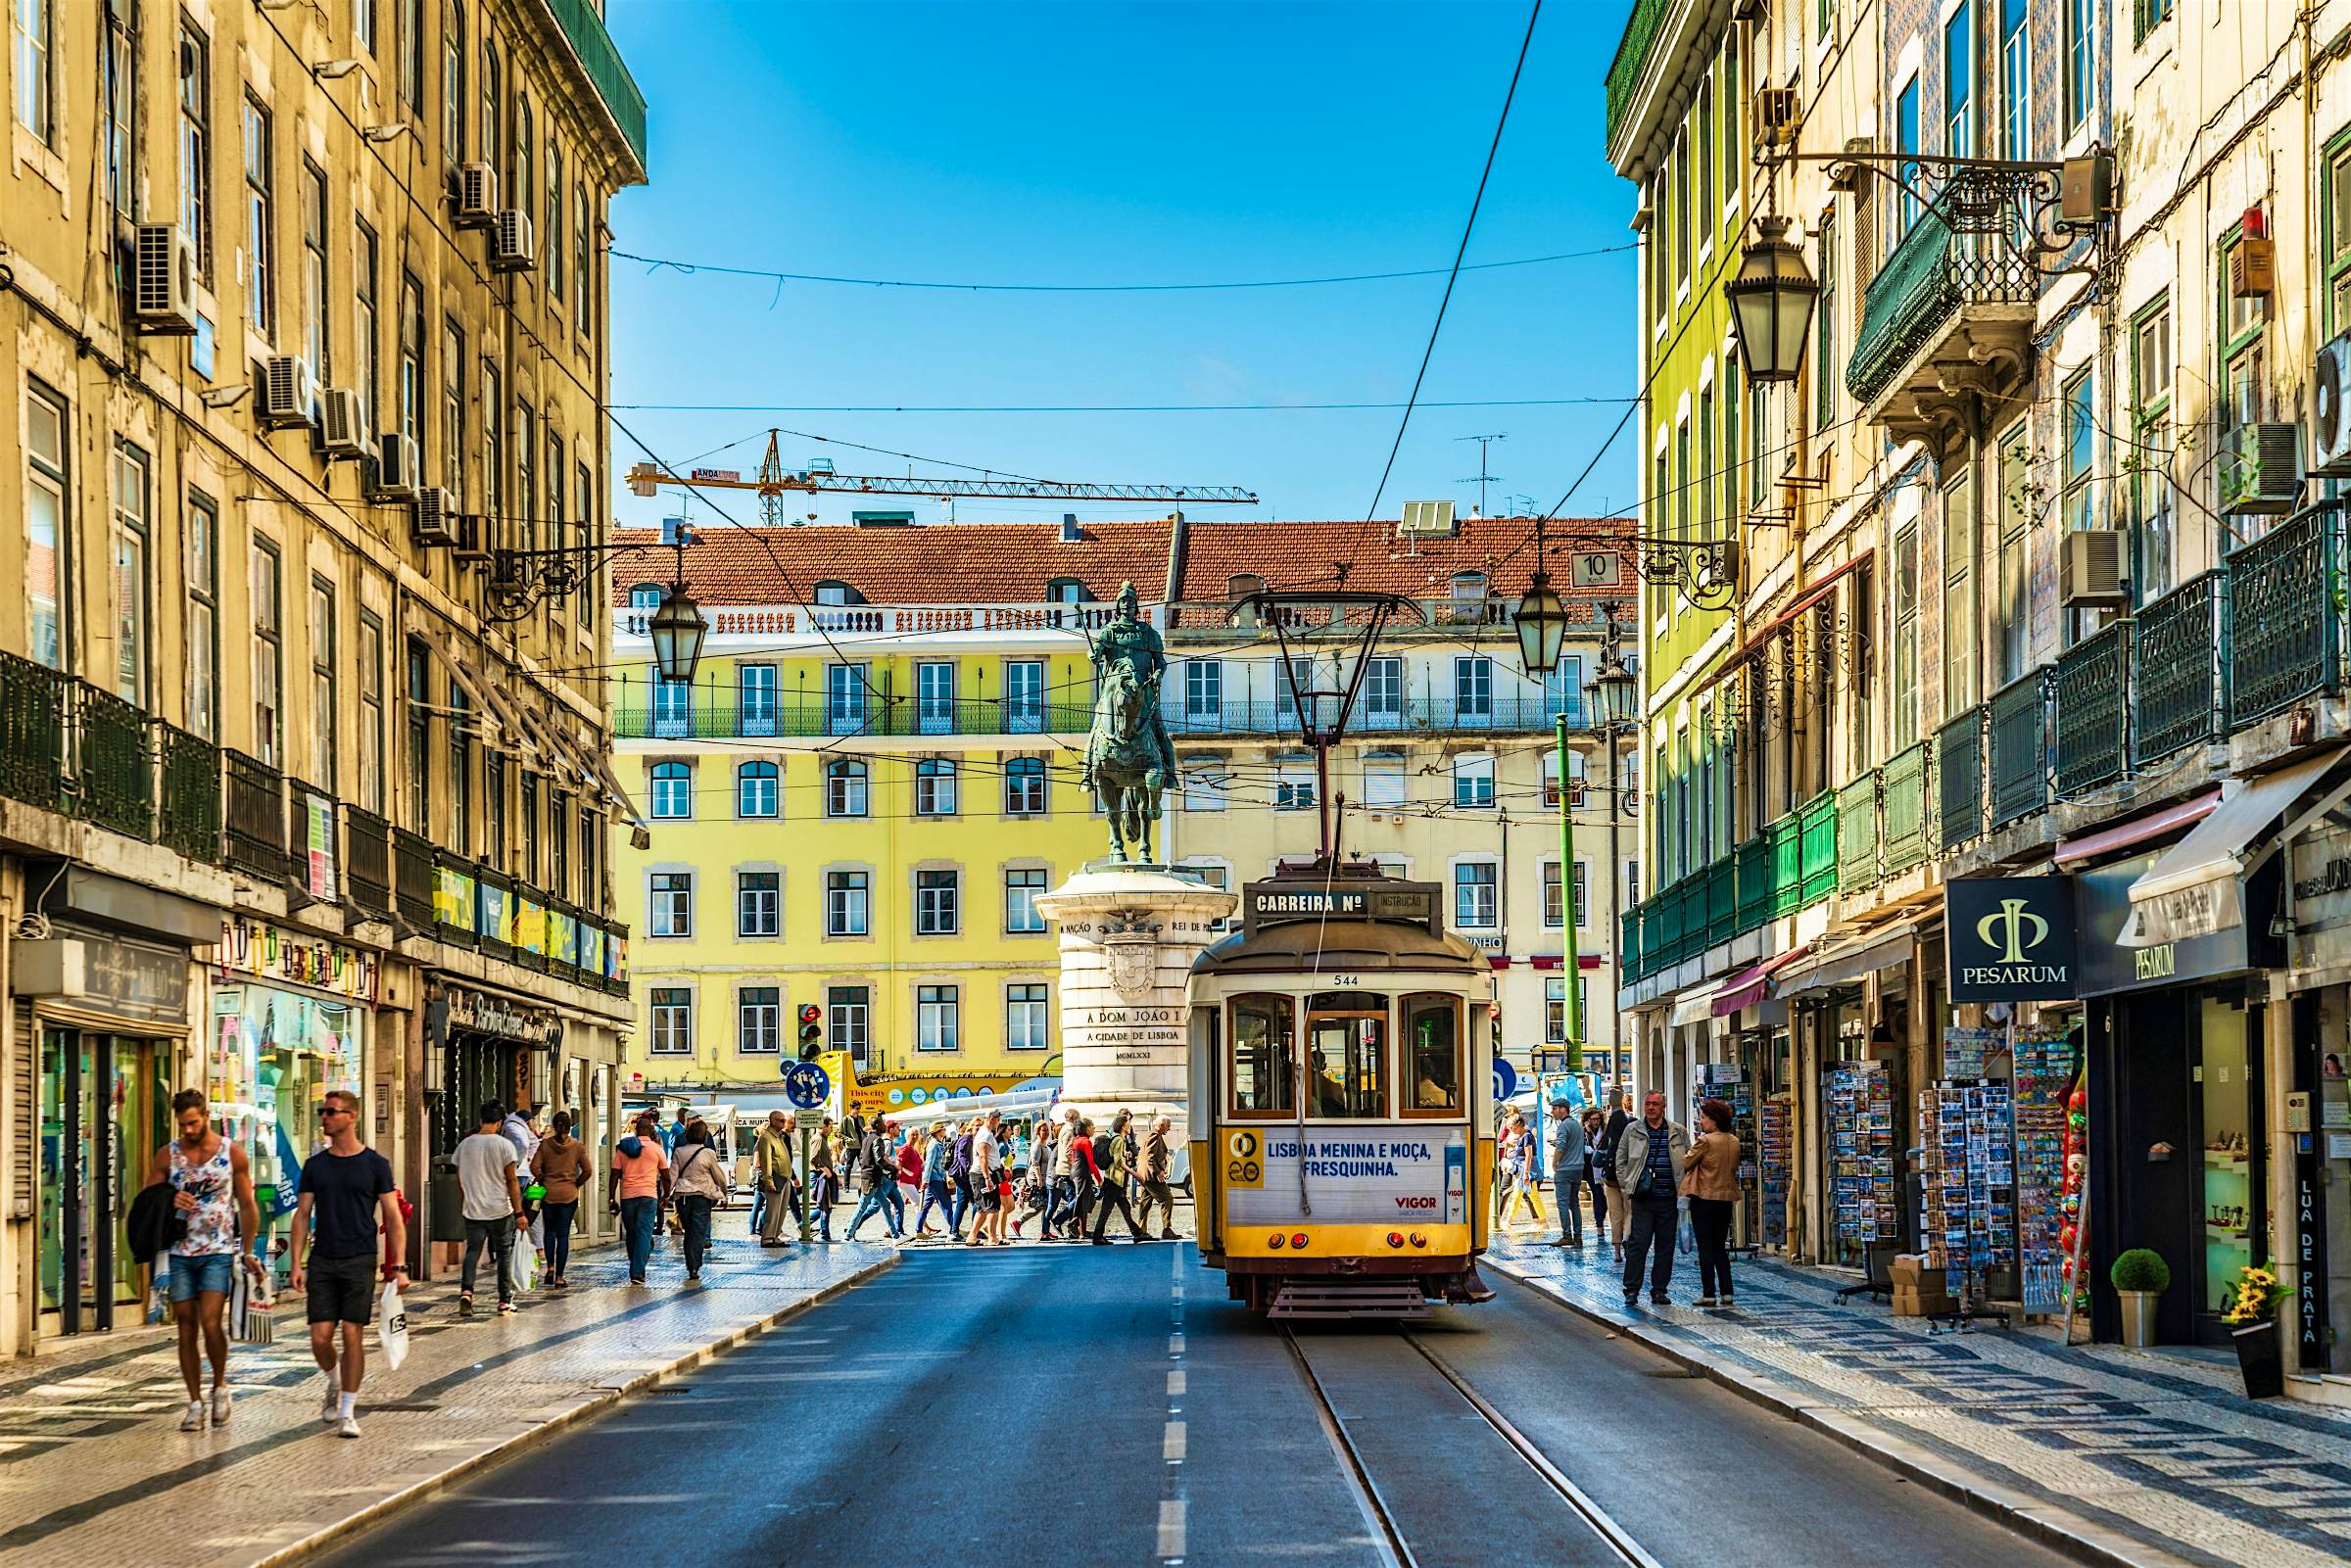 A local’s guide to Lisbon - Lonely Planet